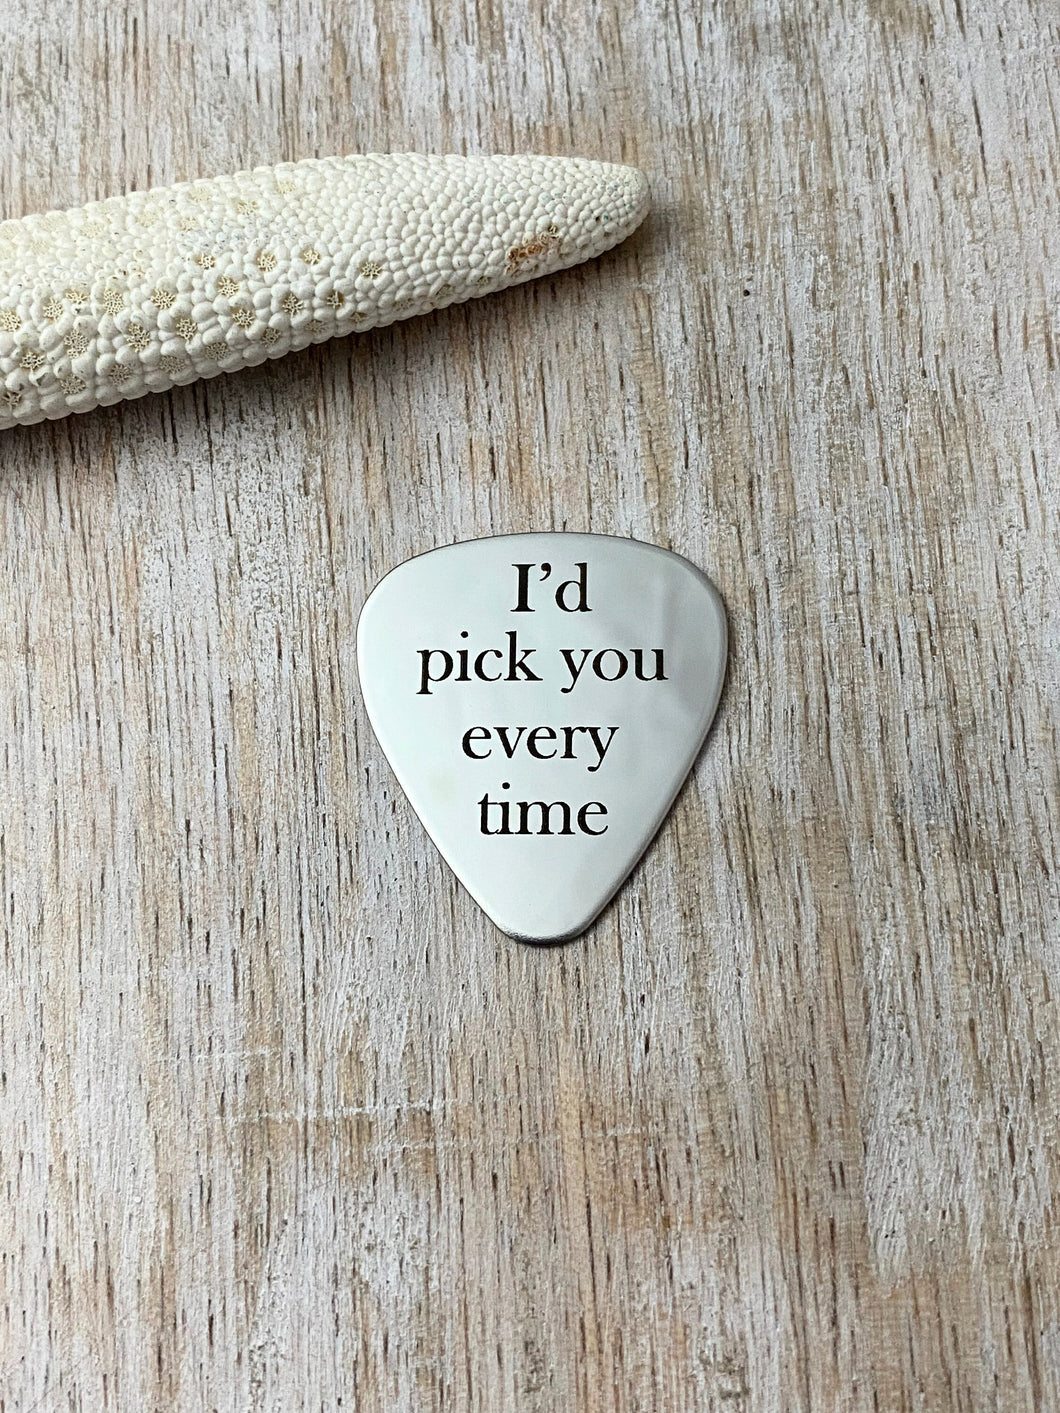 I'd pick you every time guitar pick - Stainless steel - gift for him Custom - Anniversary gift for him, Silver pick, gift for husband